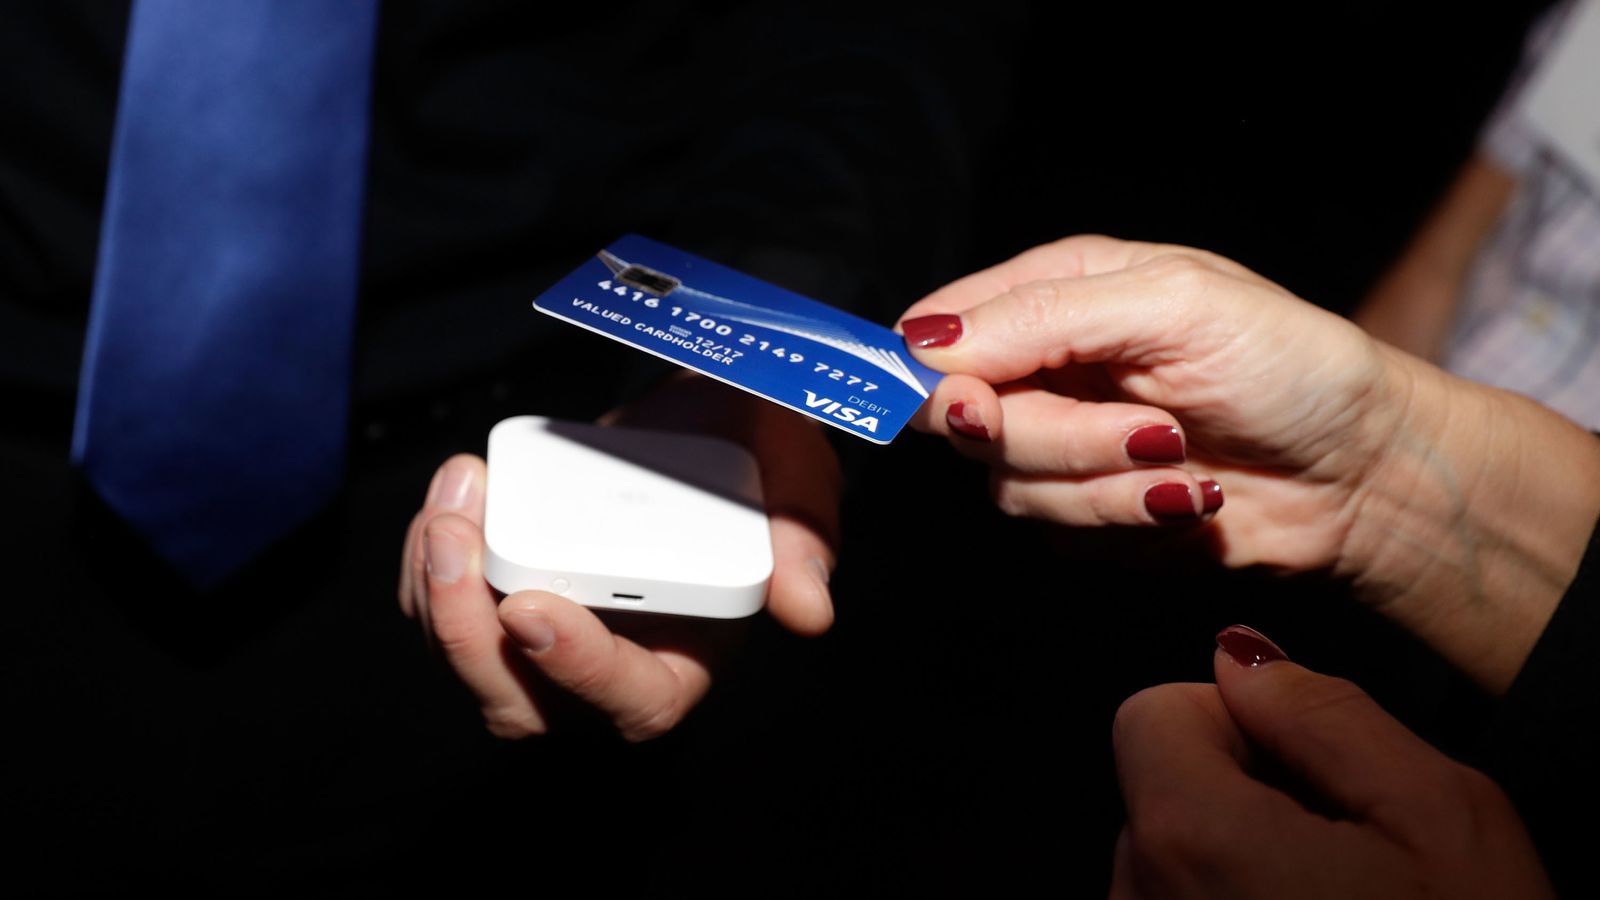 Hackers can bypass £30 limit on Visa contactless cards, study finds